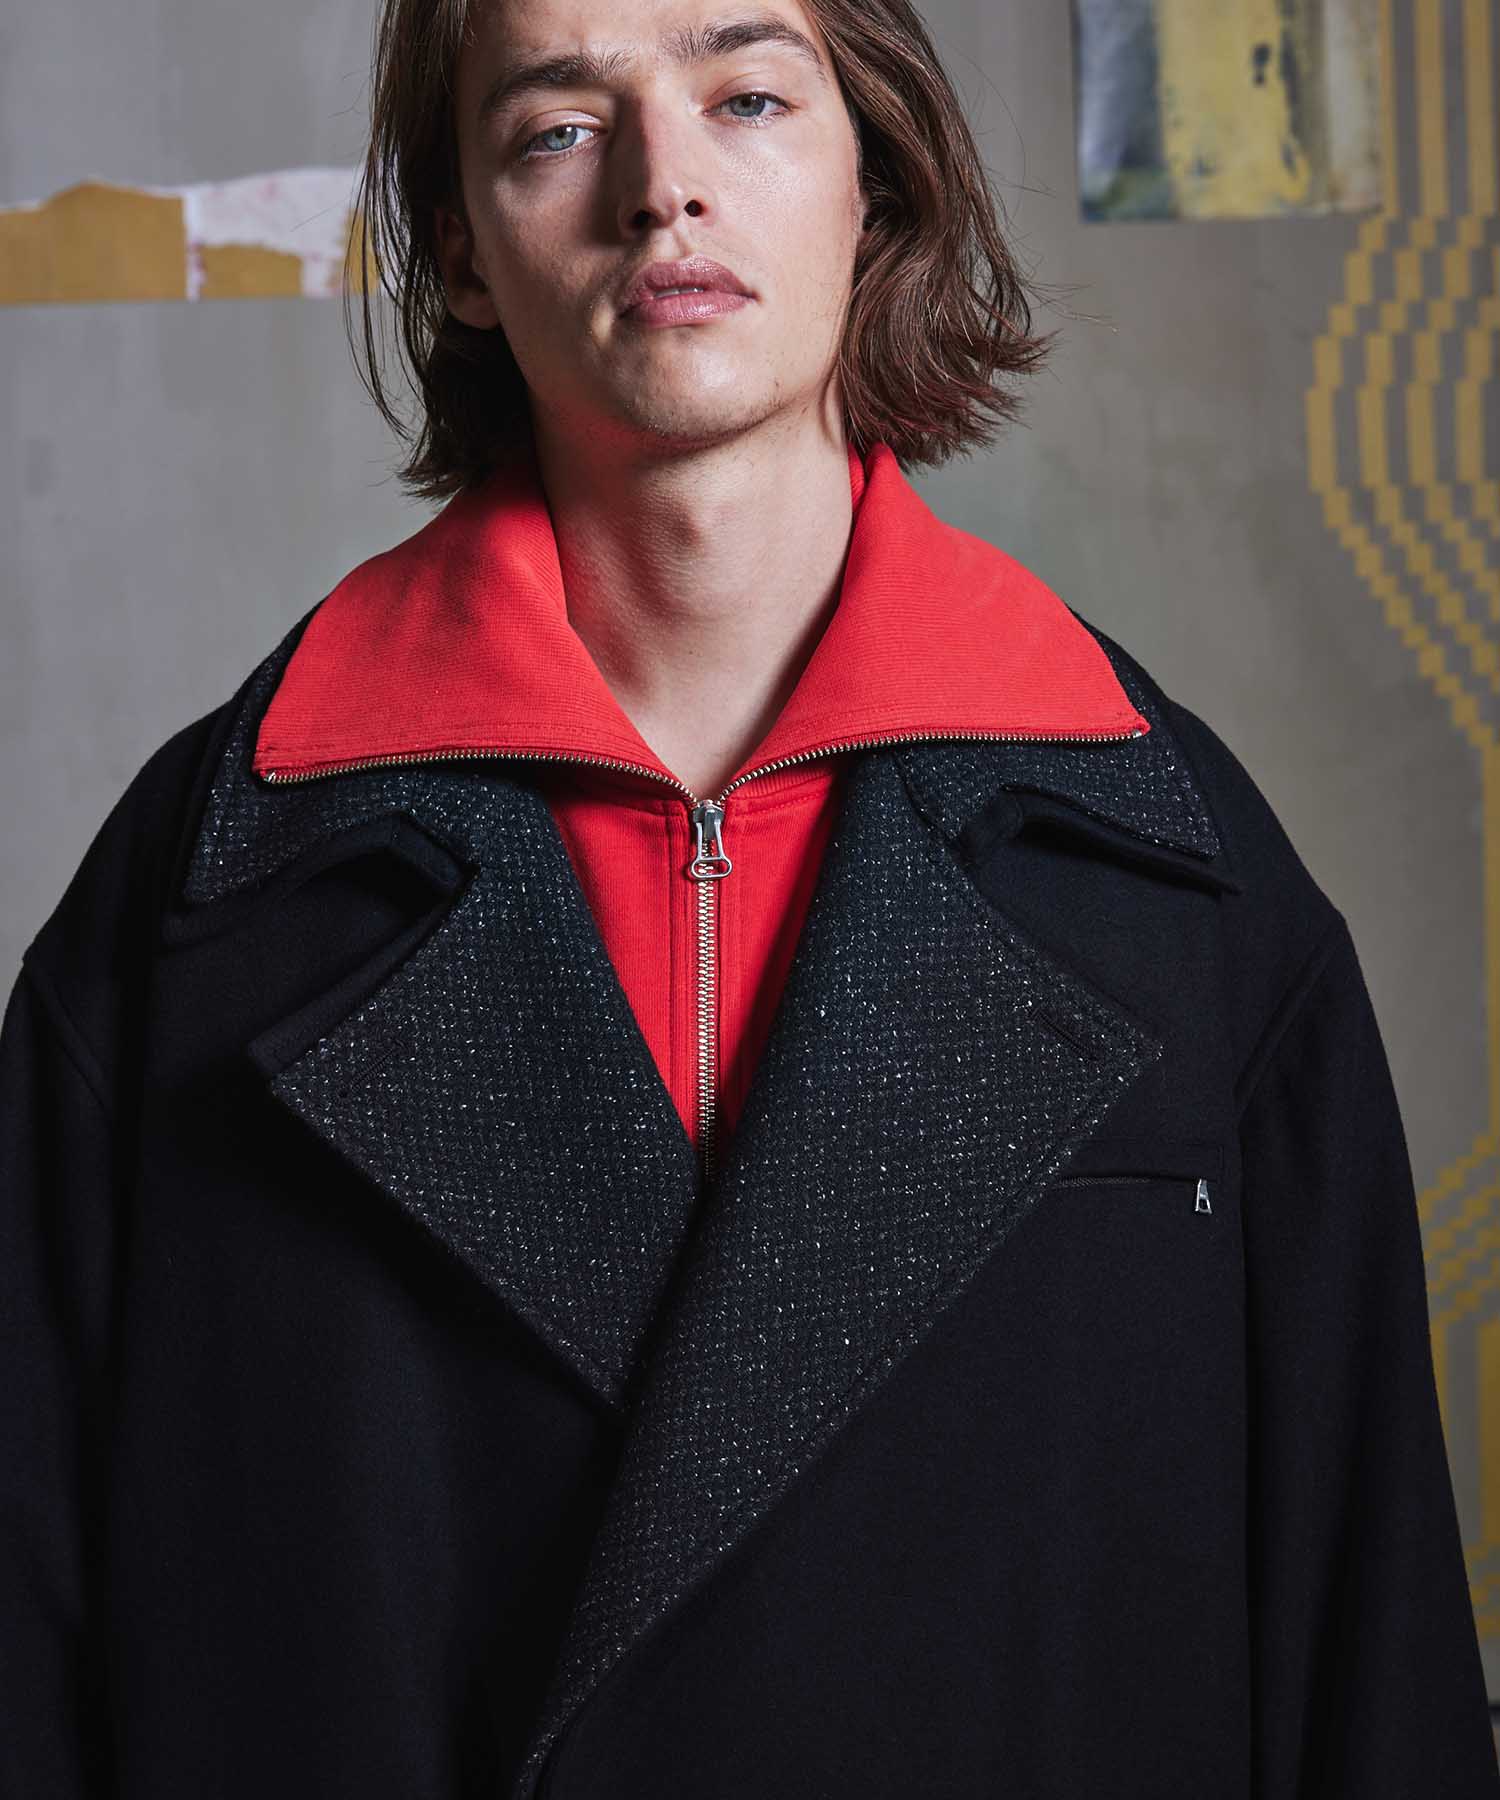 Different Material Combination Prime-Over Layering Fireman Coat